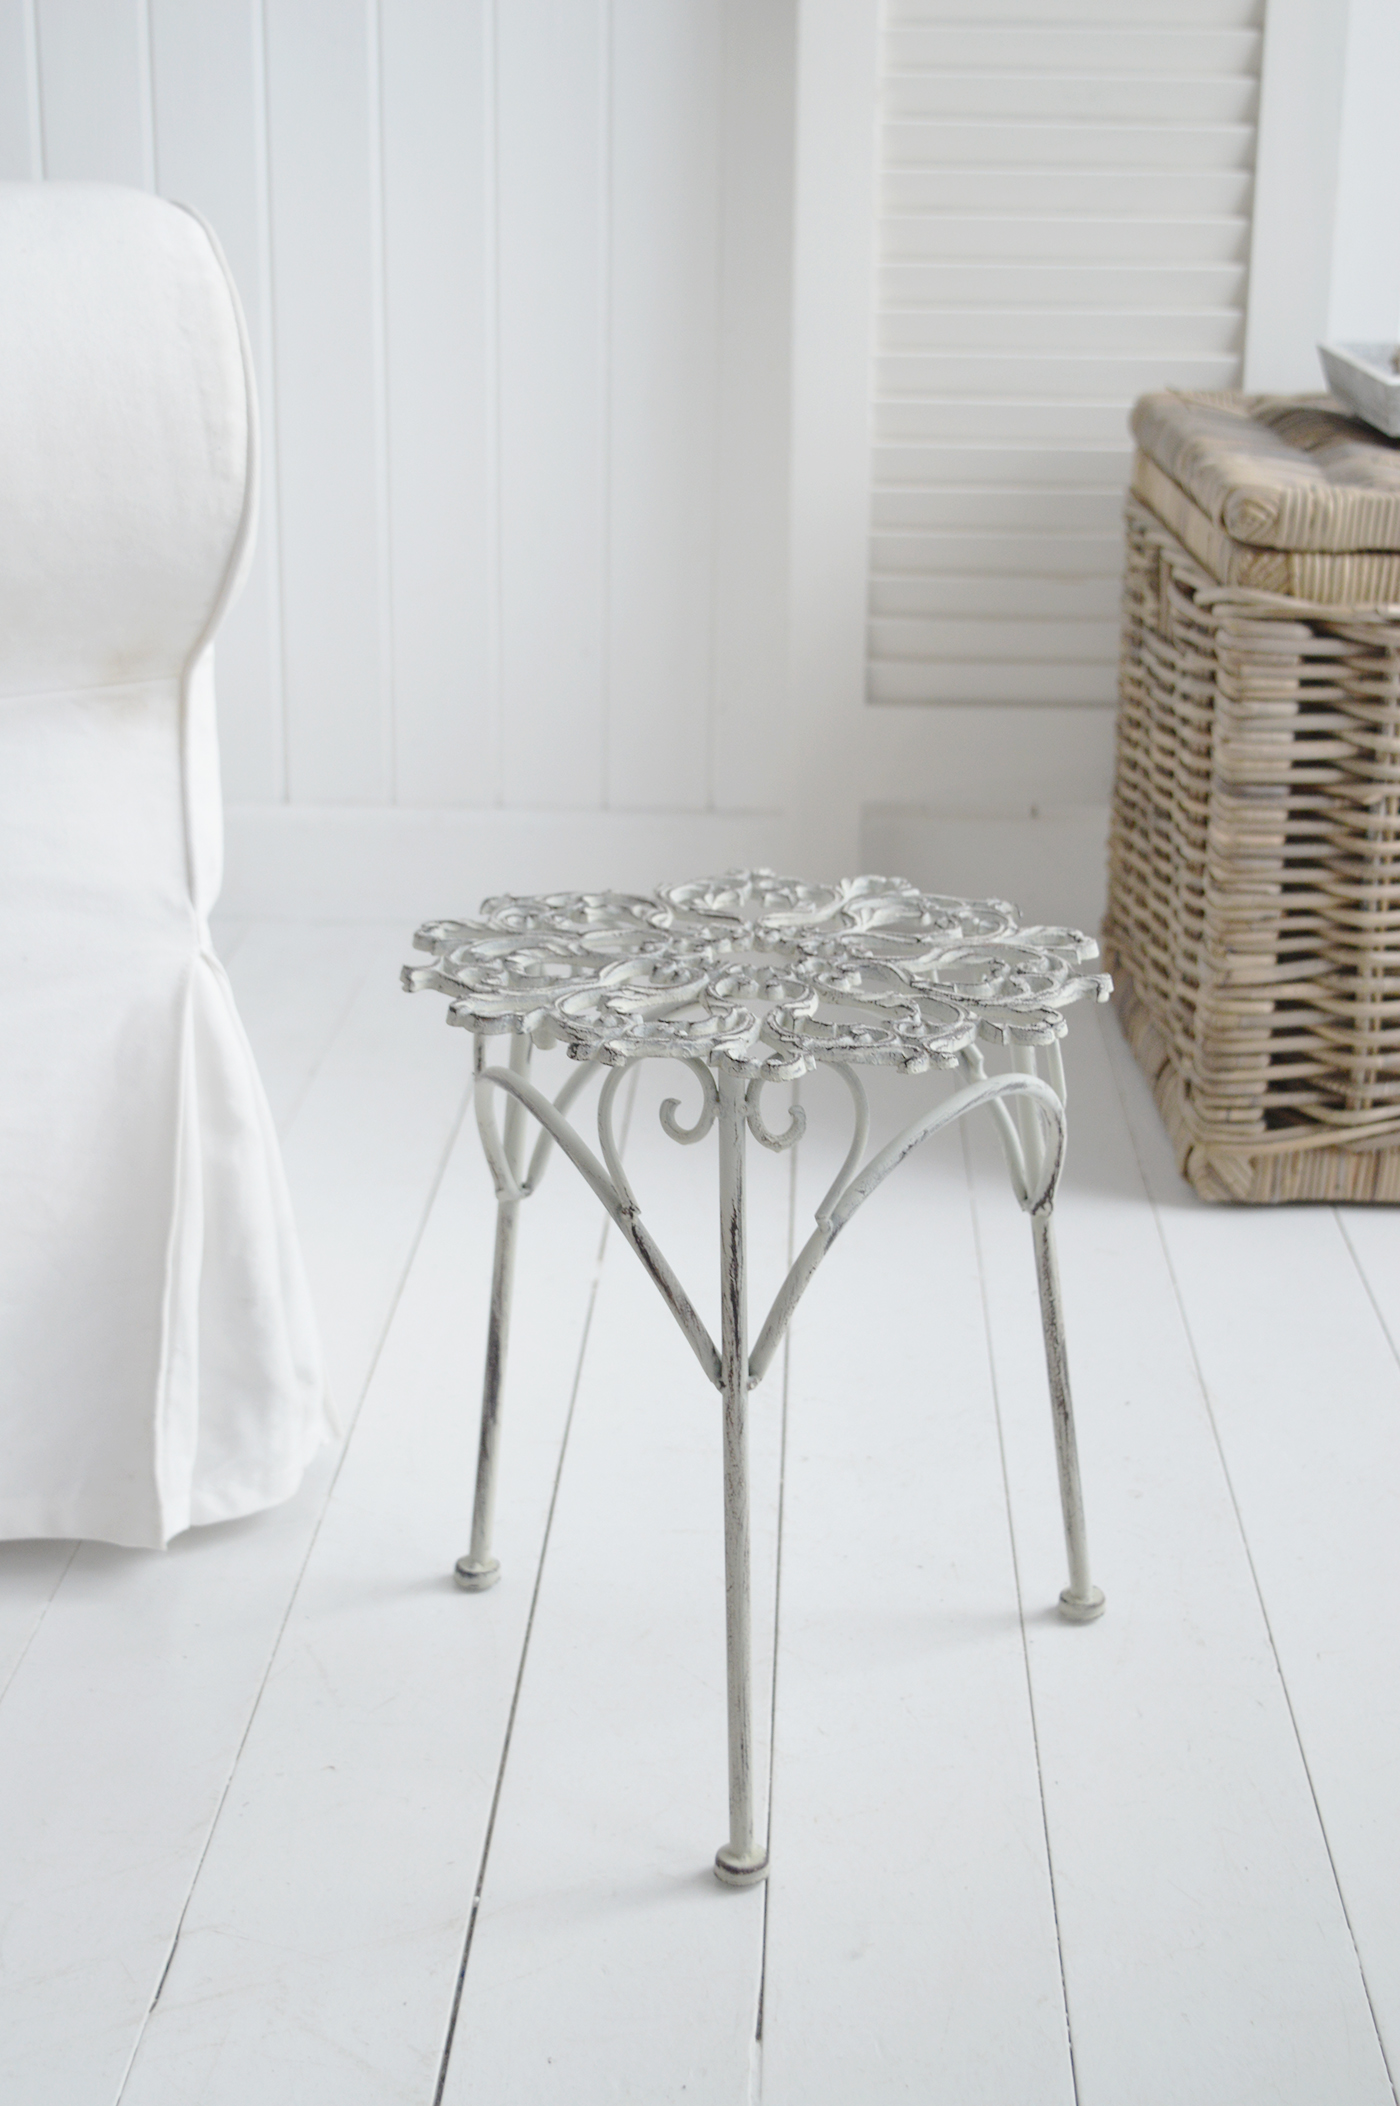 Harvard Little metal grey side table - Modern farmhouse, country and coastal furniture for New England interiors